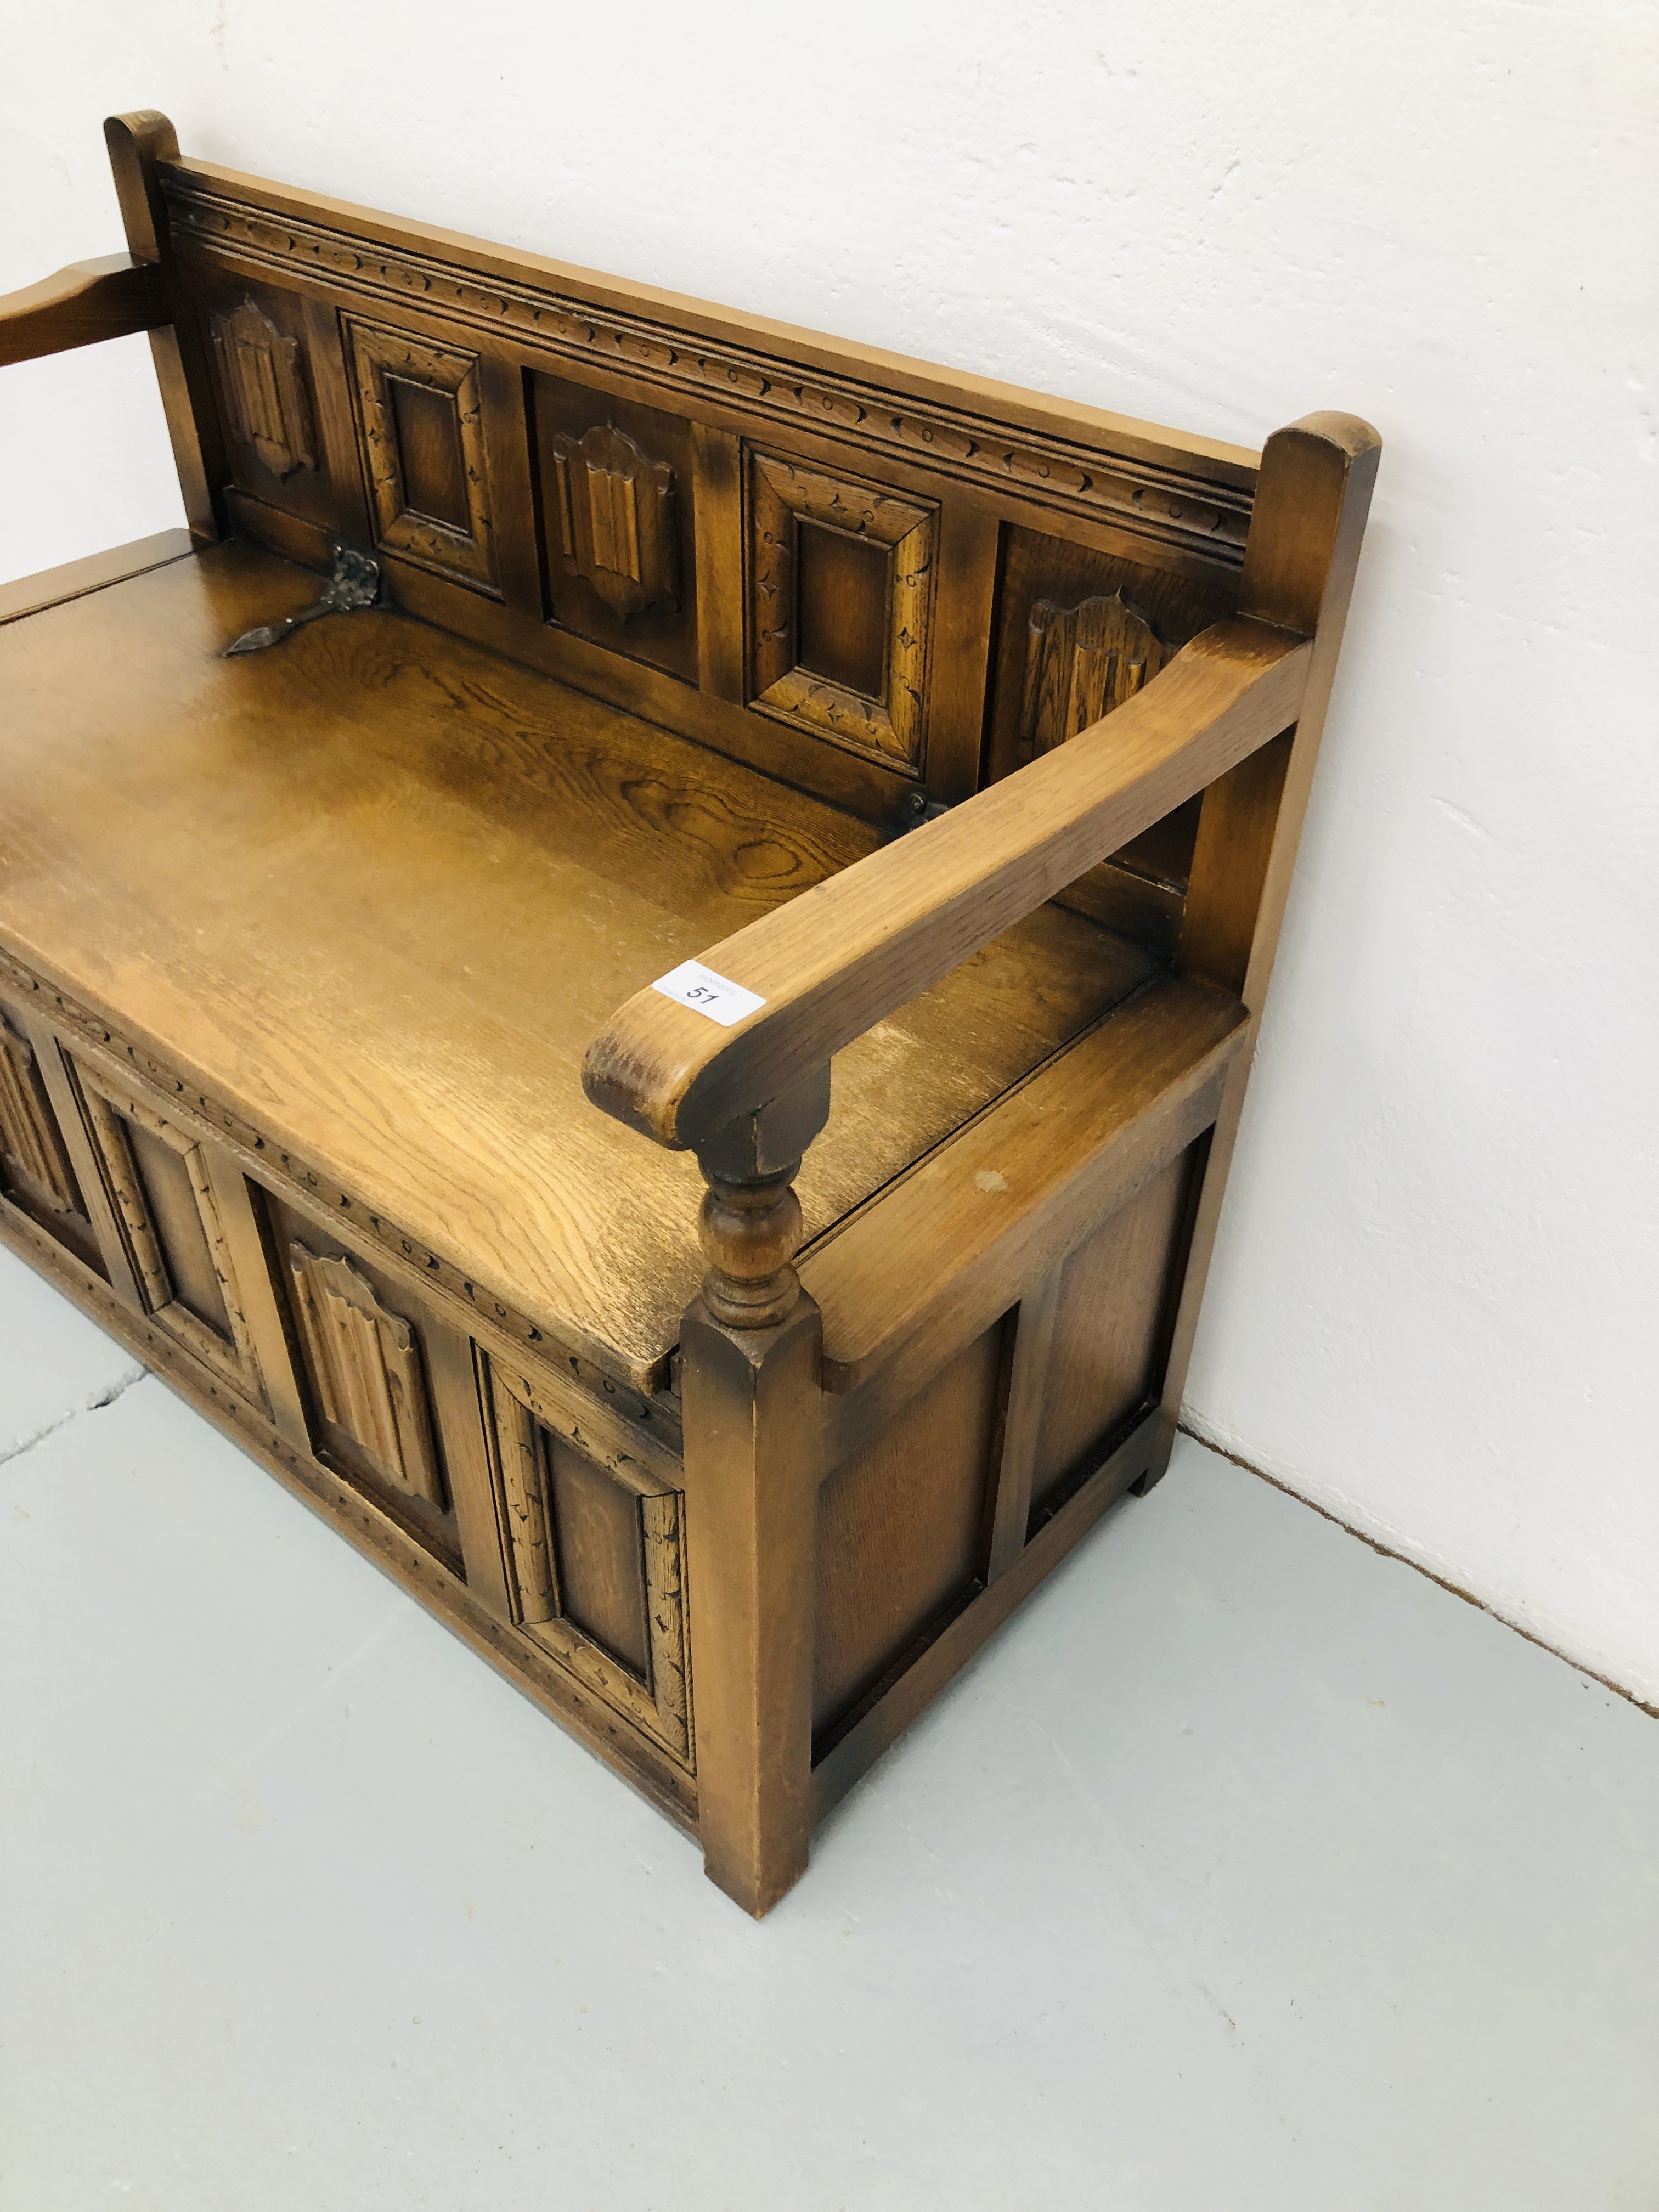 OAK MONKS BENCH WITH LINEN FOLD DETAIL - Image 6 of 6